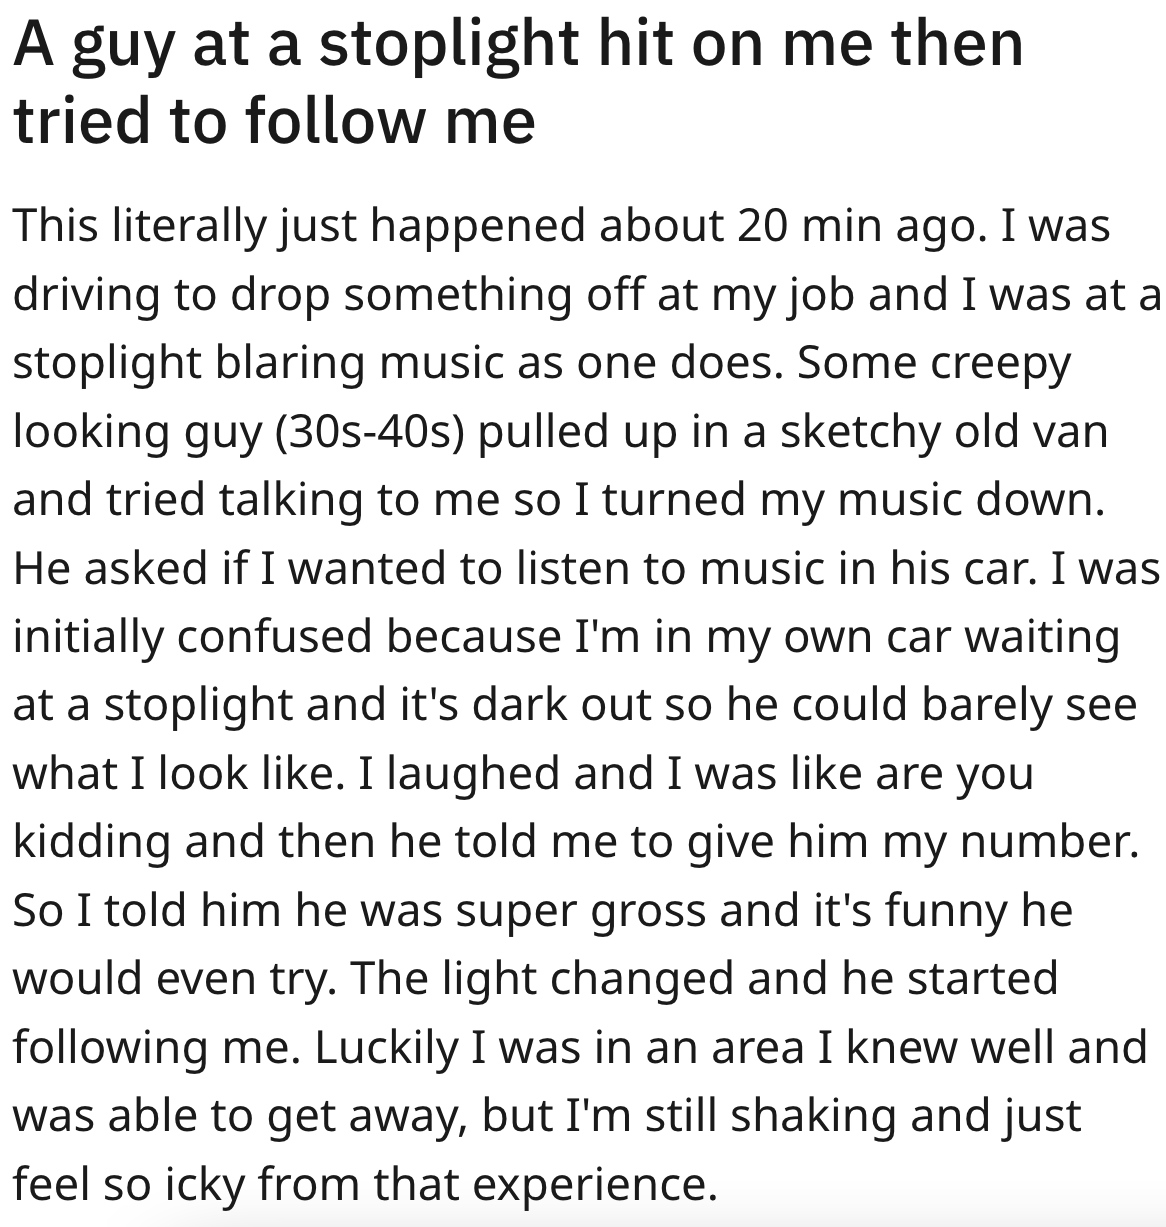 A woman sharing an experience of a man following her